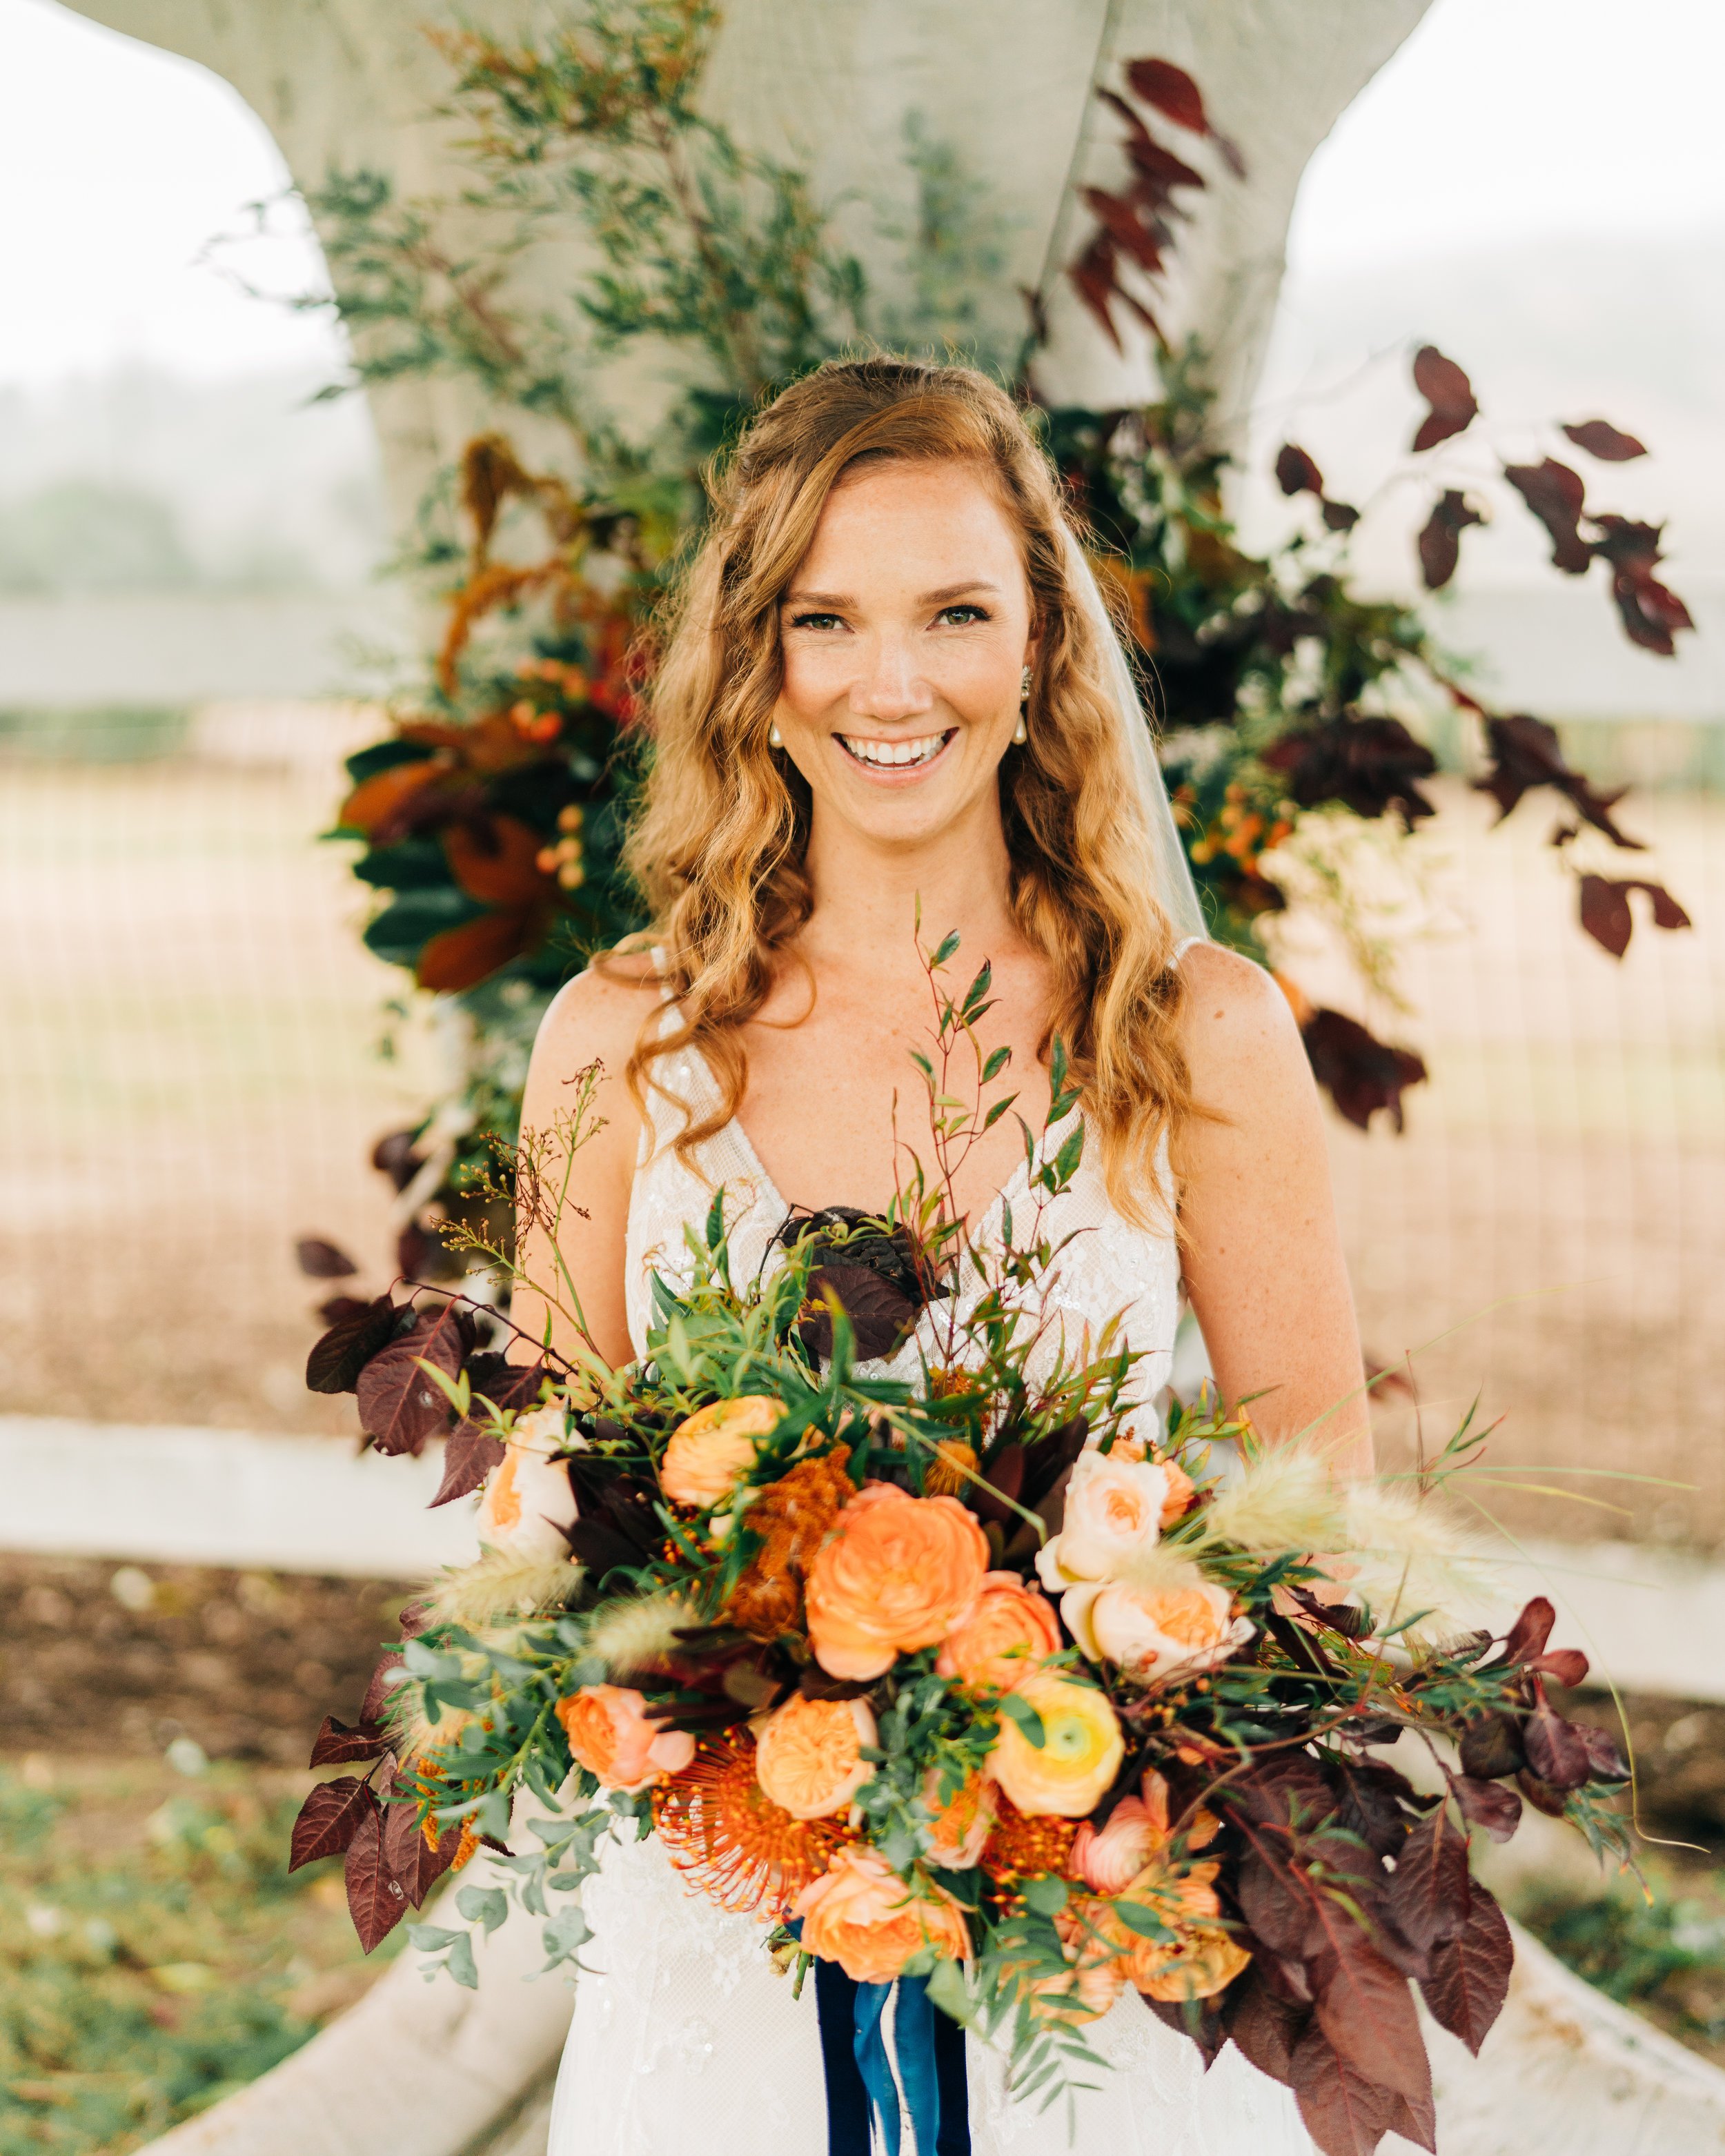 www.santabarbarawedding.com | Brandon Bibbins Photography | The Cottages at Polo Run | Christina Welch Floral | Bride Holds Bouquet